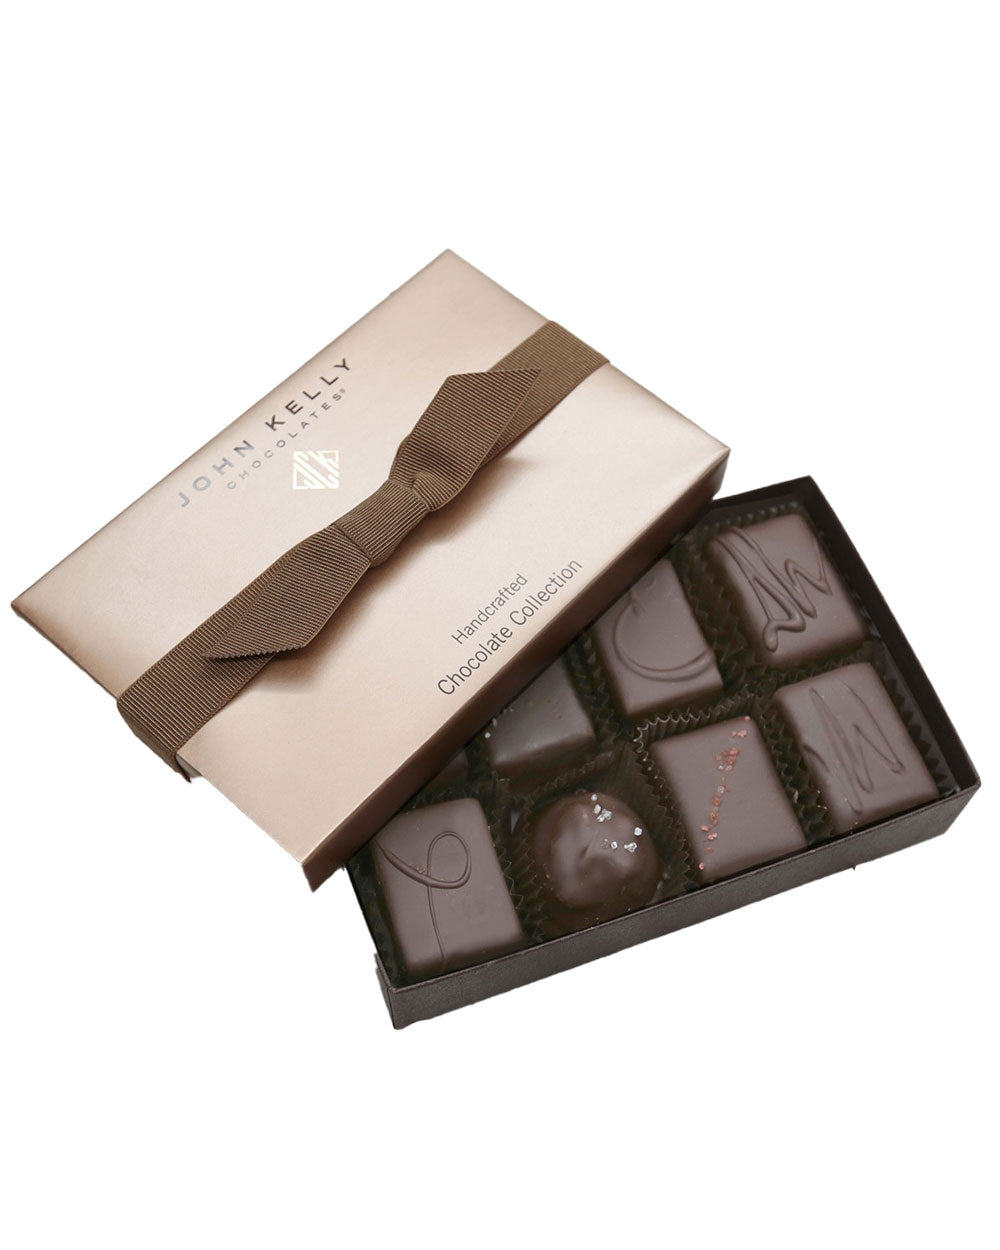 8 Piece Assorted Chocolate Collection